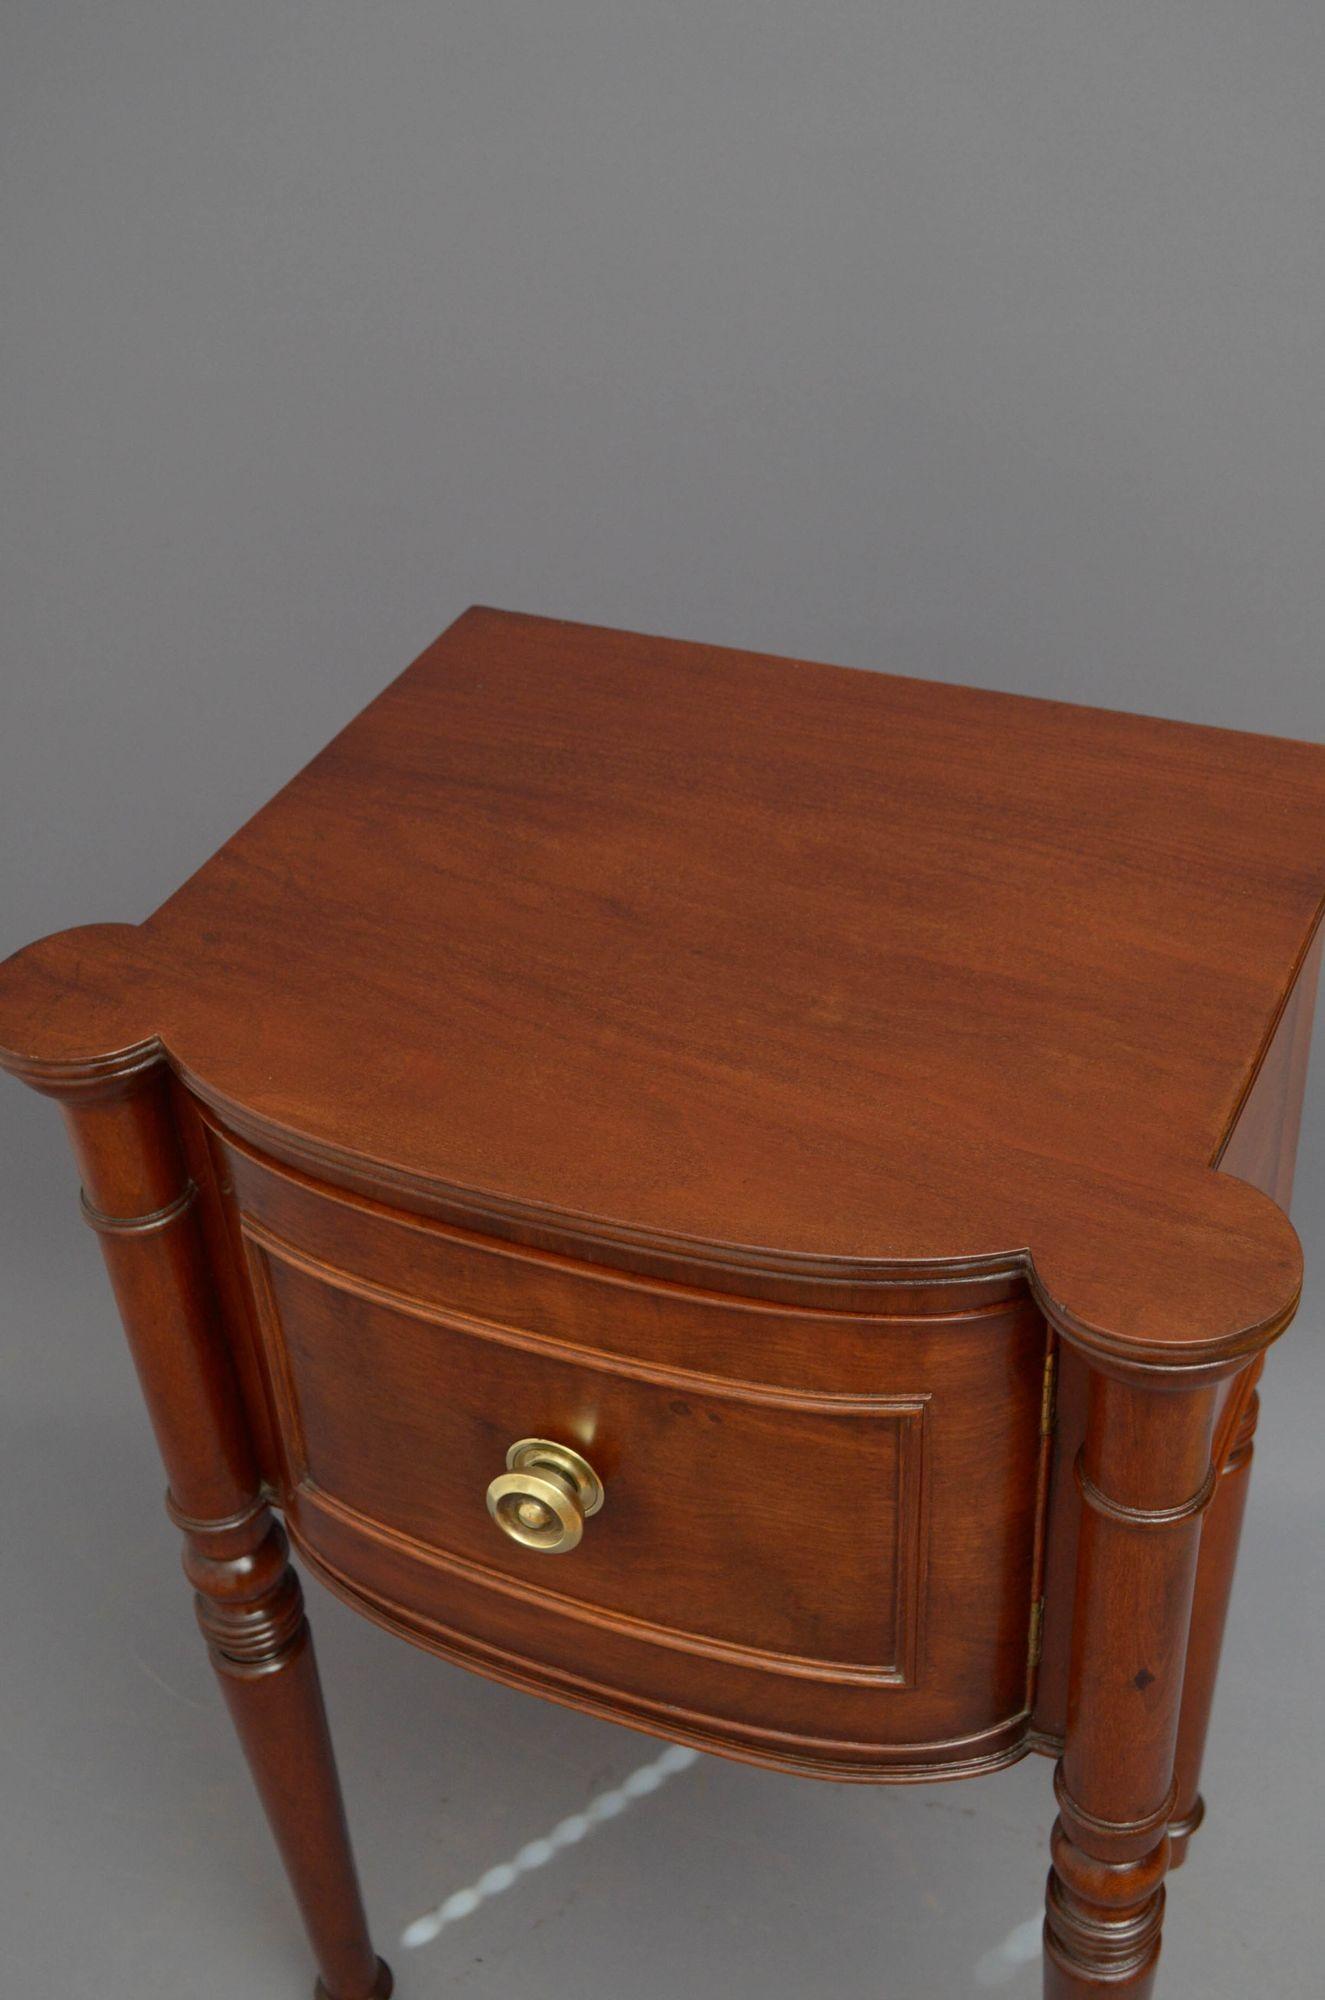 Sn5327 Very unusual Regency pot cupboard of bow fronted design, having figured top with reeded edge above moulded and panelled door fitted with original knob, all standing on turned and ringed legs. This antique bedside cabinet is in home ready